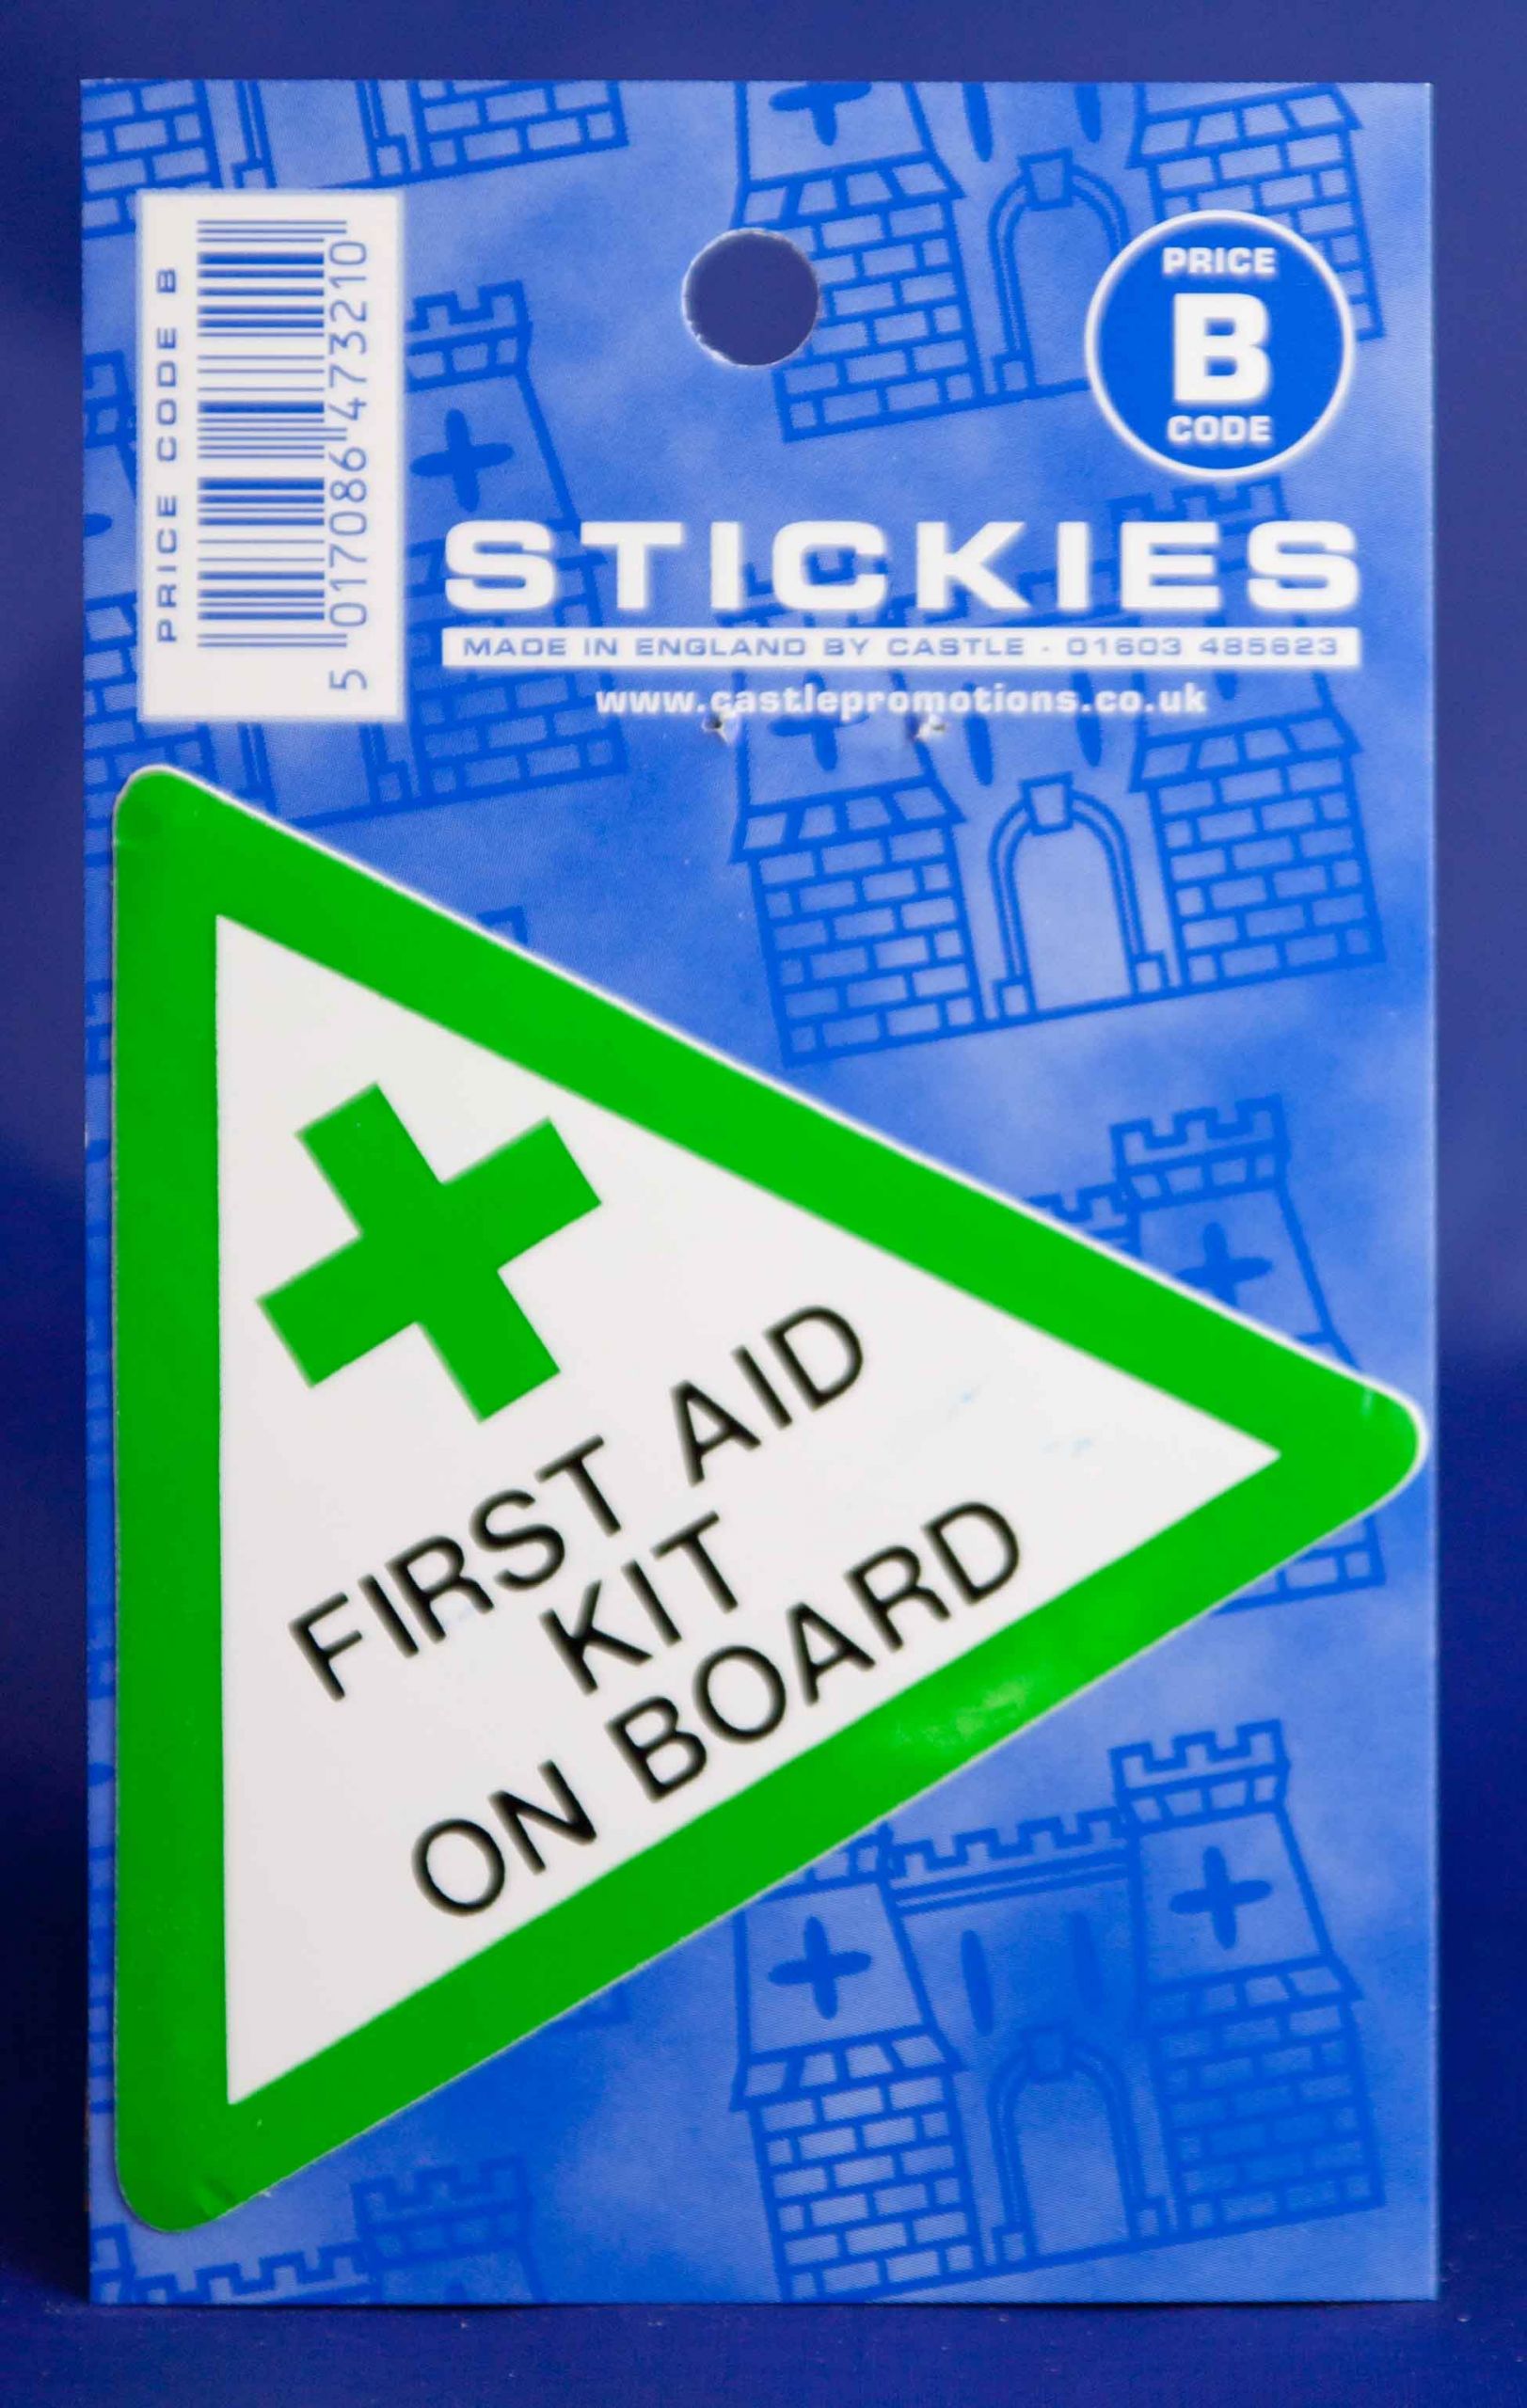 V45 First Aid Kit On Board